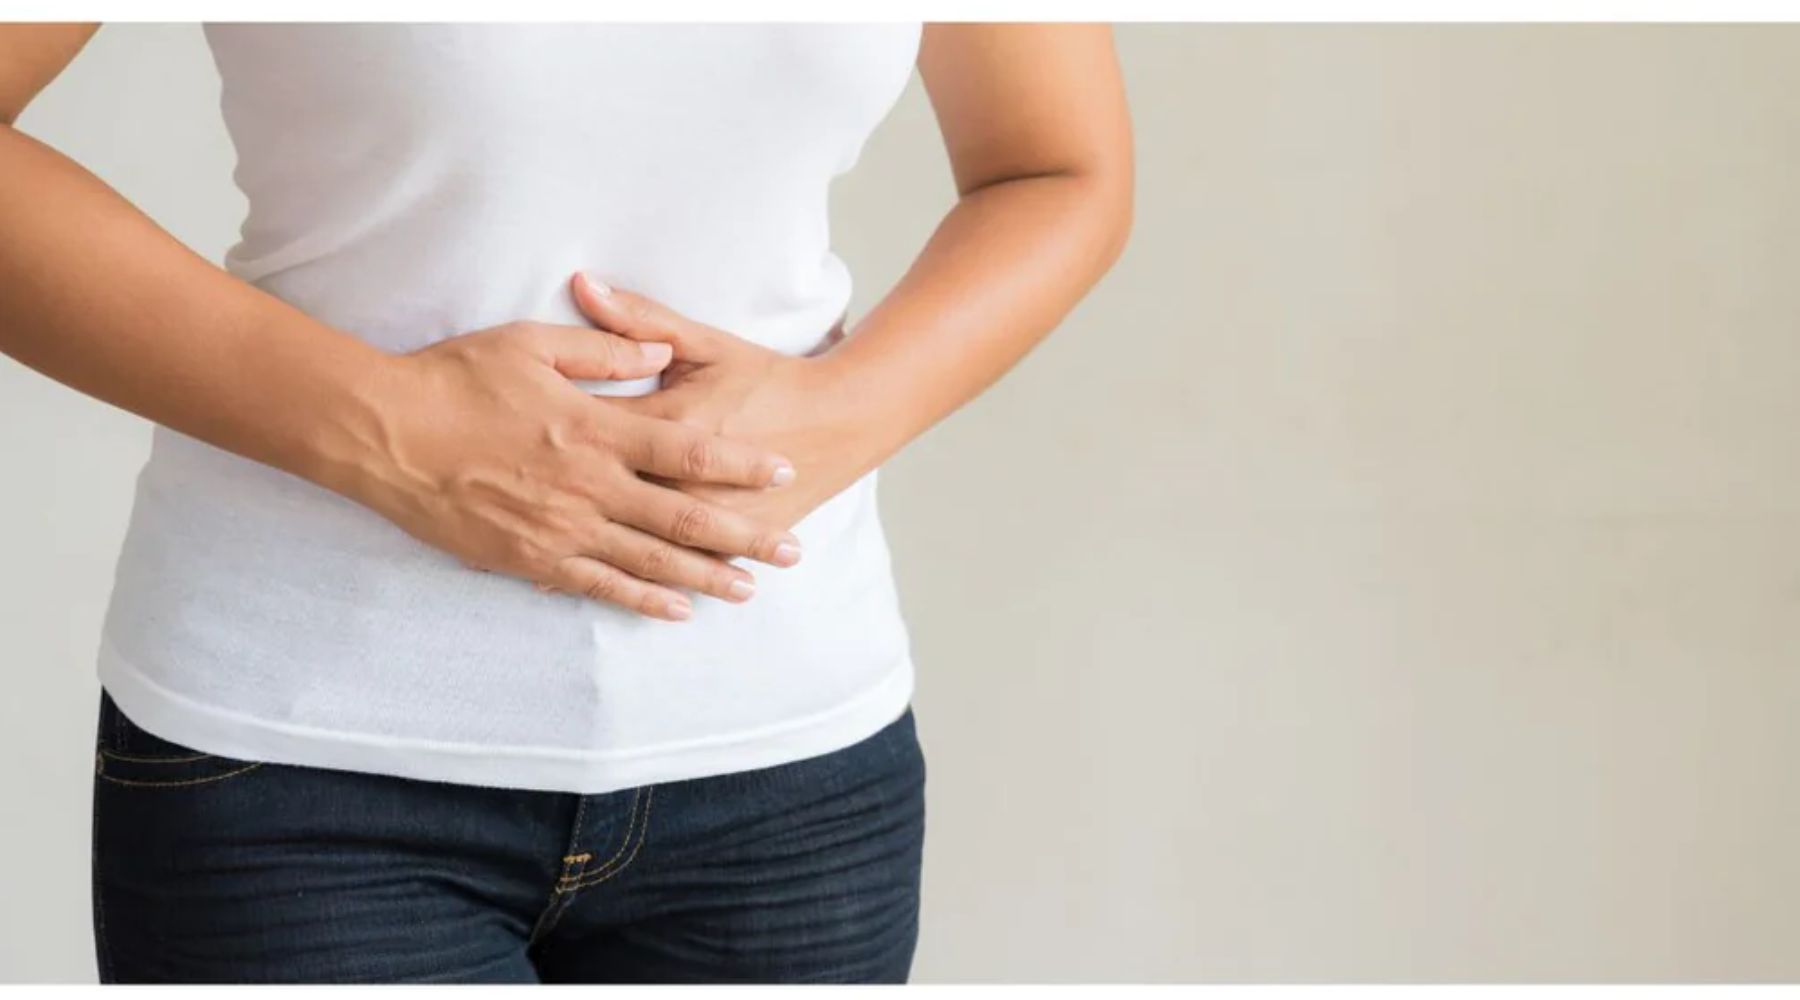 6 Simple Tips to Improve Digestion and Say Goodbye to Bloating